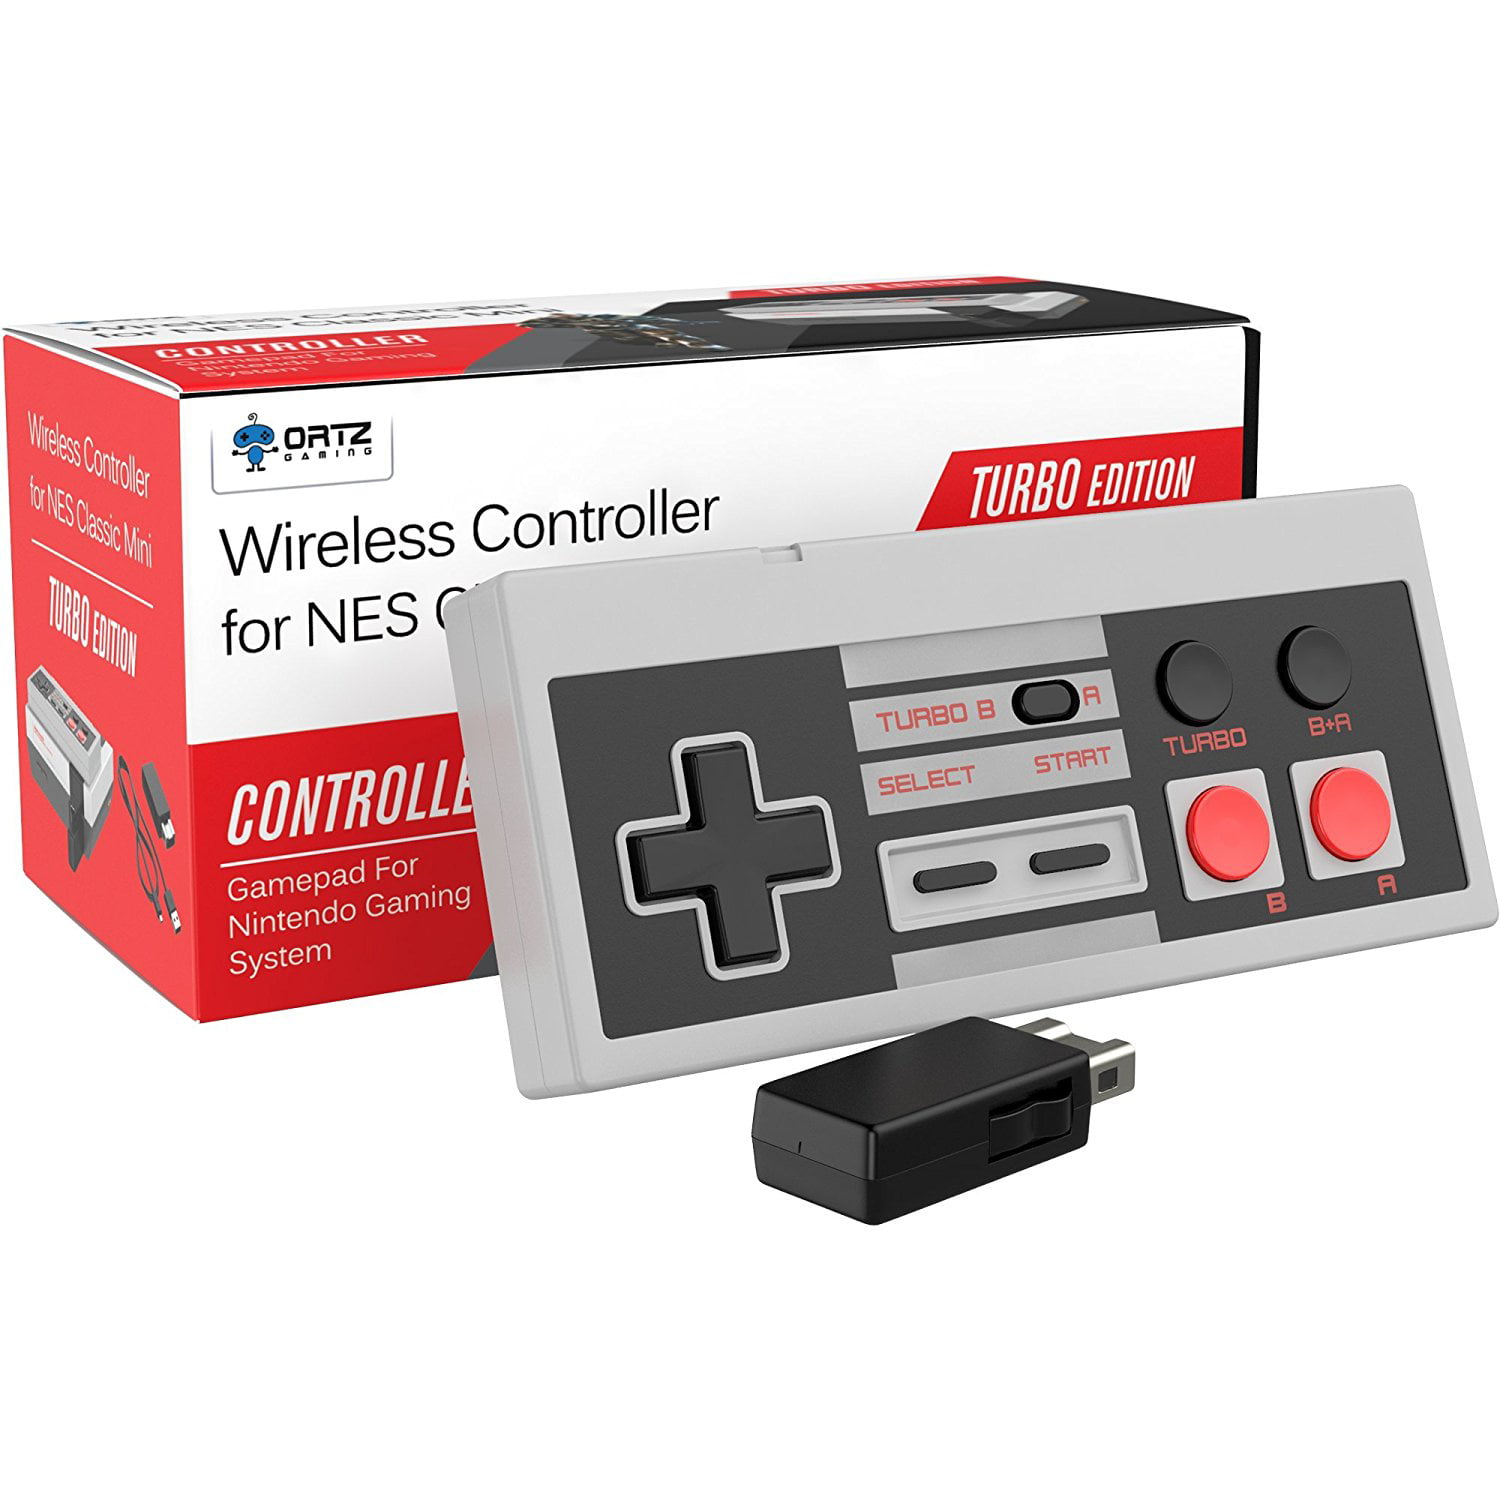 frugthave Religiøs Beloved Ortz Wireless NES Classic Controller for Nintendo Mini Edition Console  [TURBO EDITION] 10ft - Walmart.com